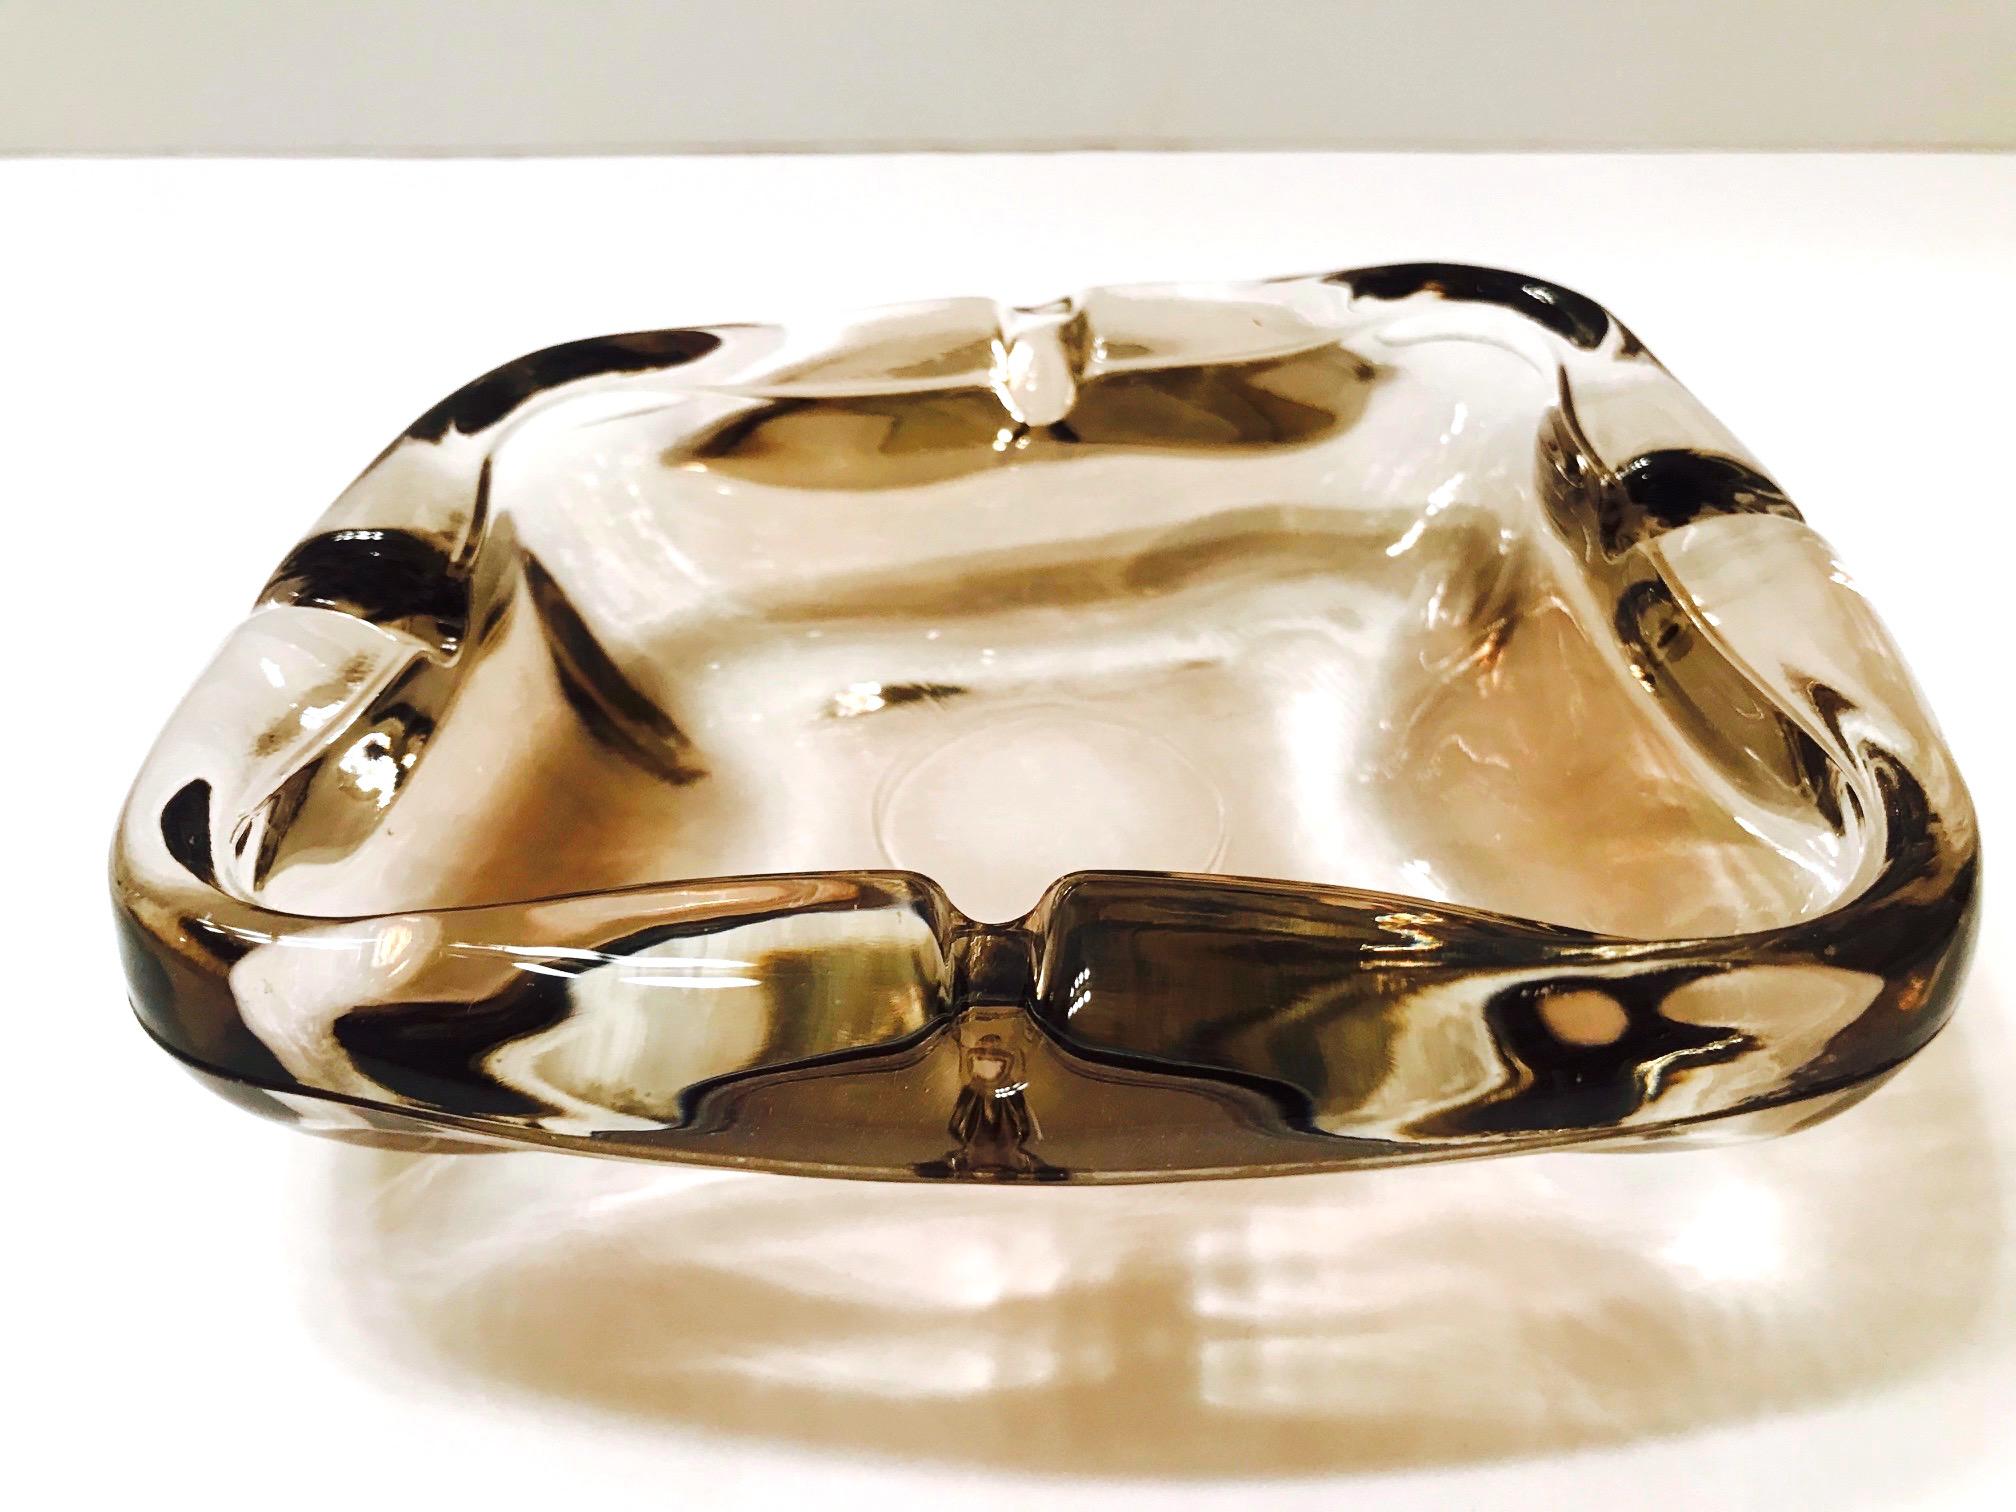 Mid-20th Century Pair of French Mid-Century Modern Smoked Glass Ashtrays, 1960s